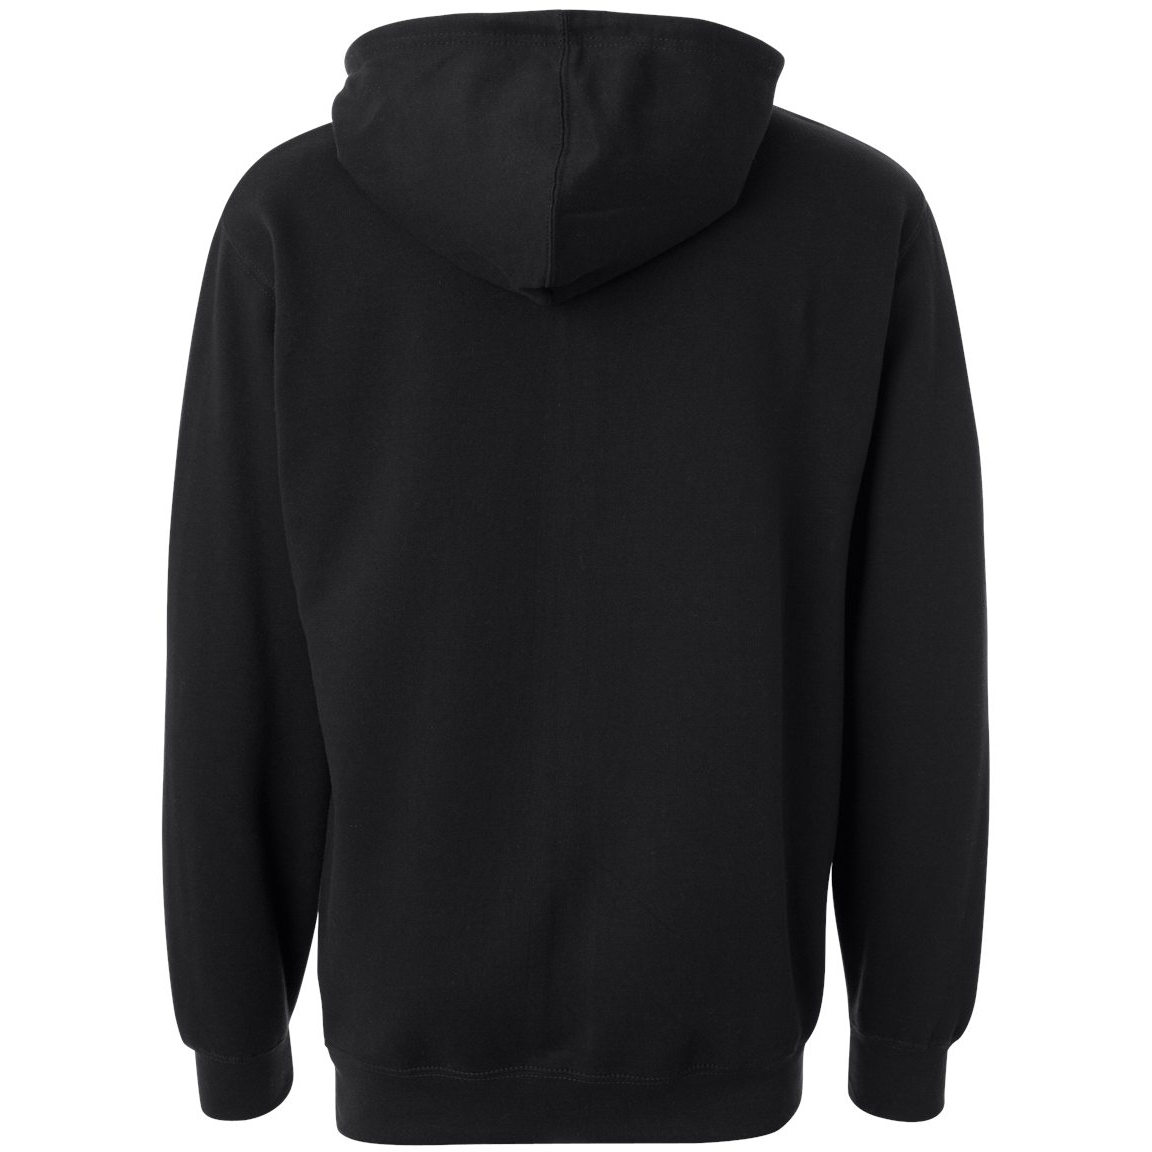 Independent Trading Co. SS4500 Midweight Hooded Sweatshirt - Black ...